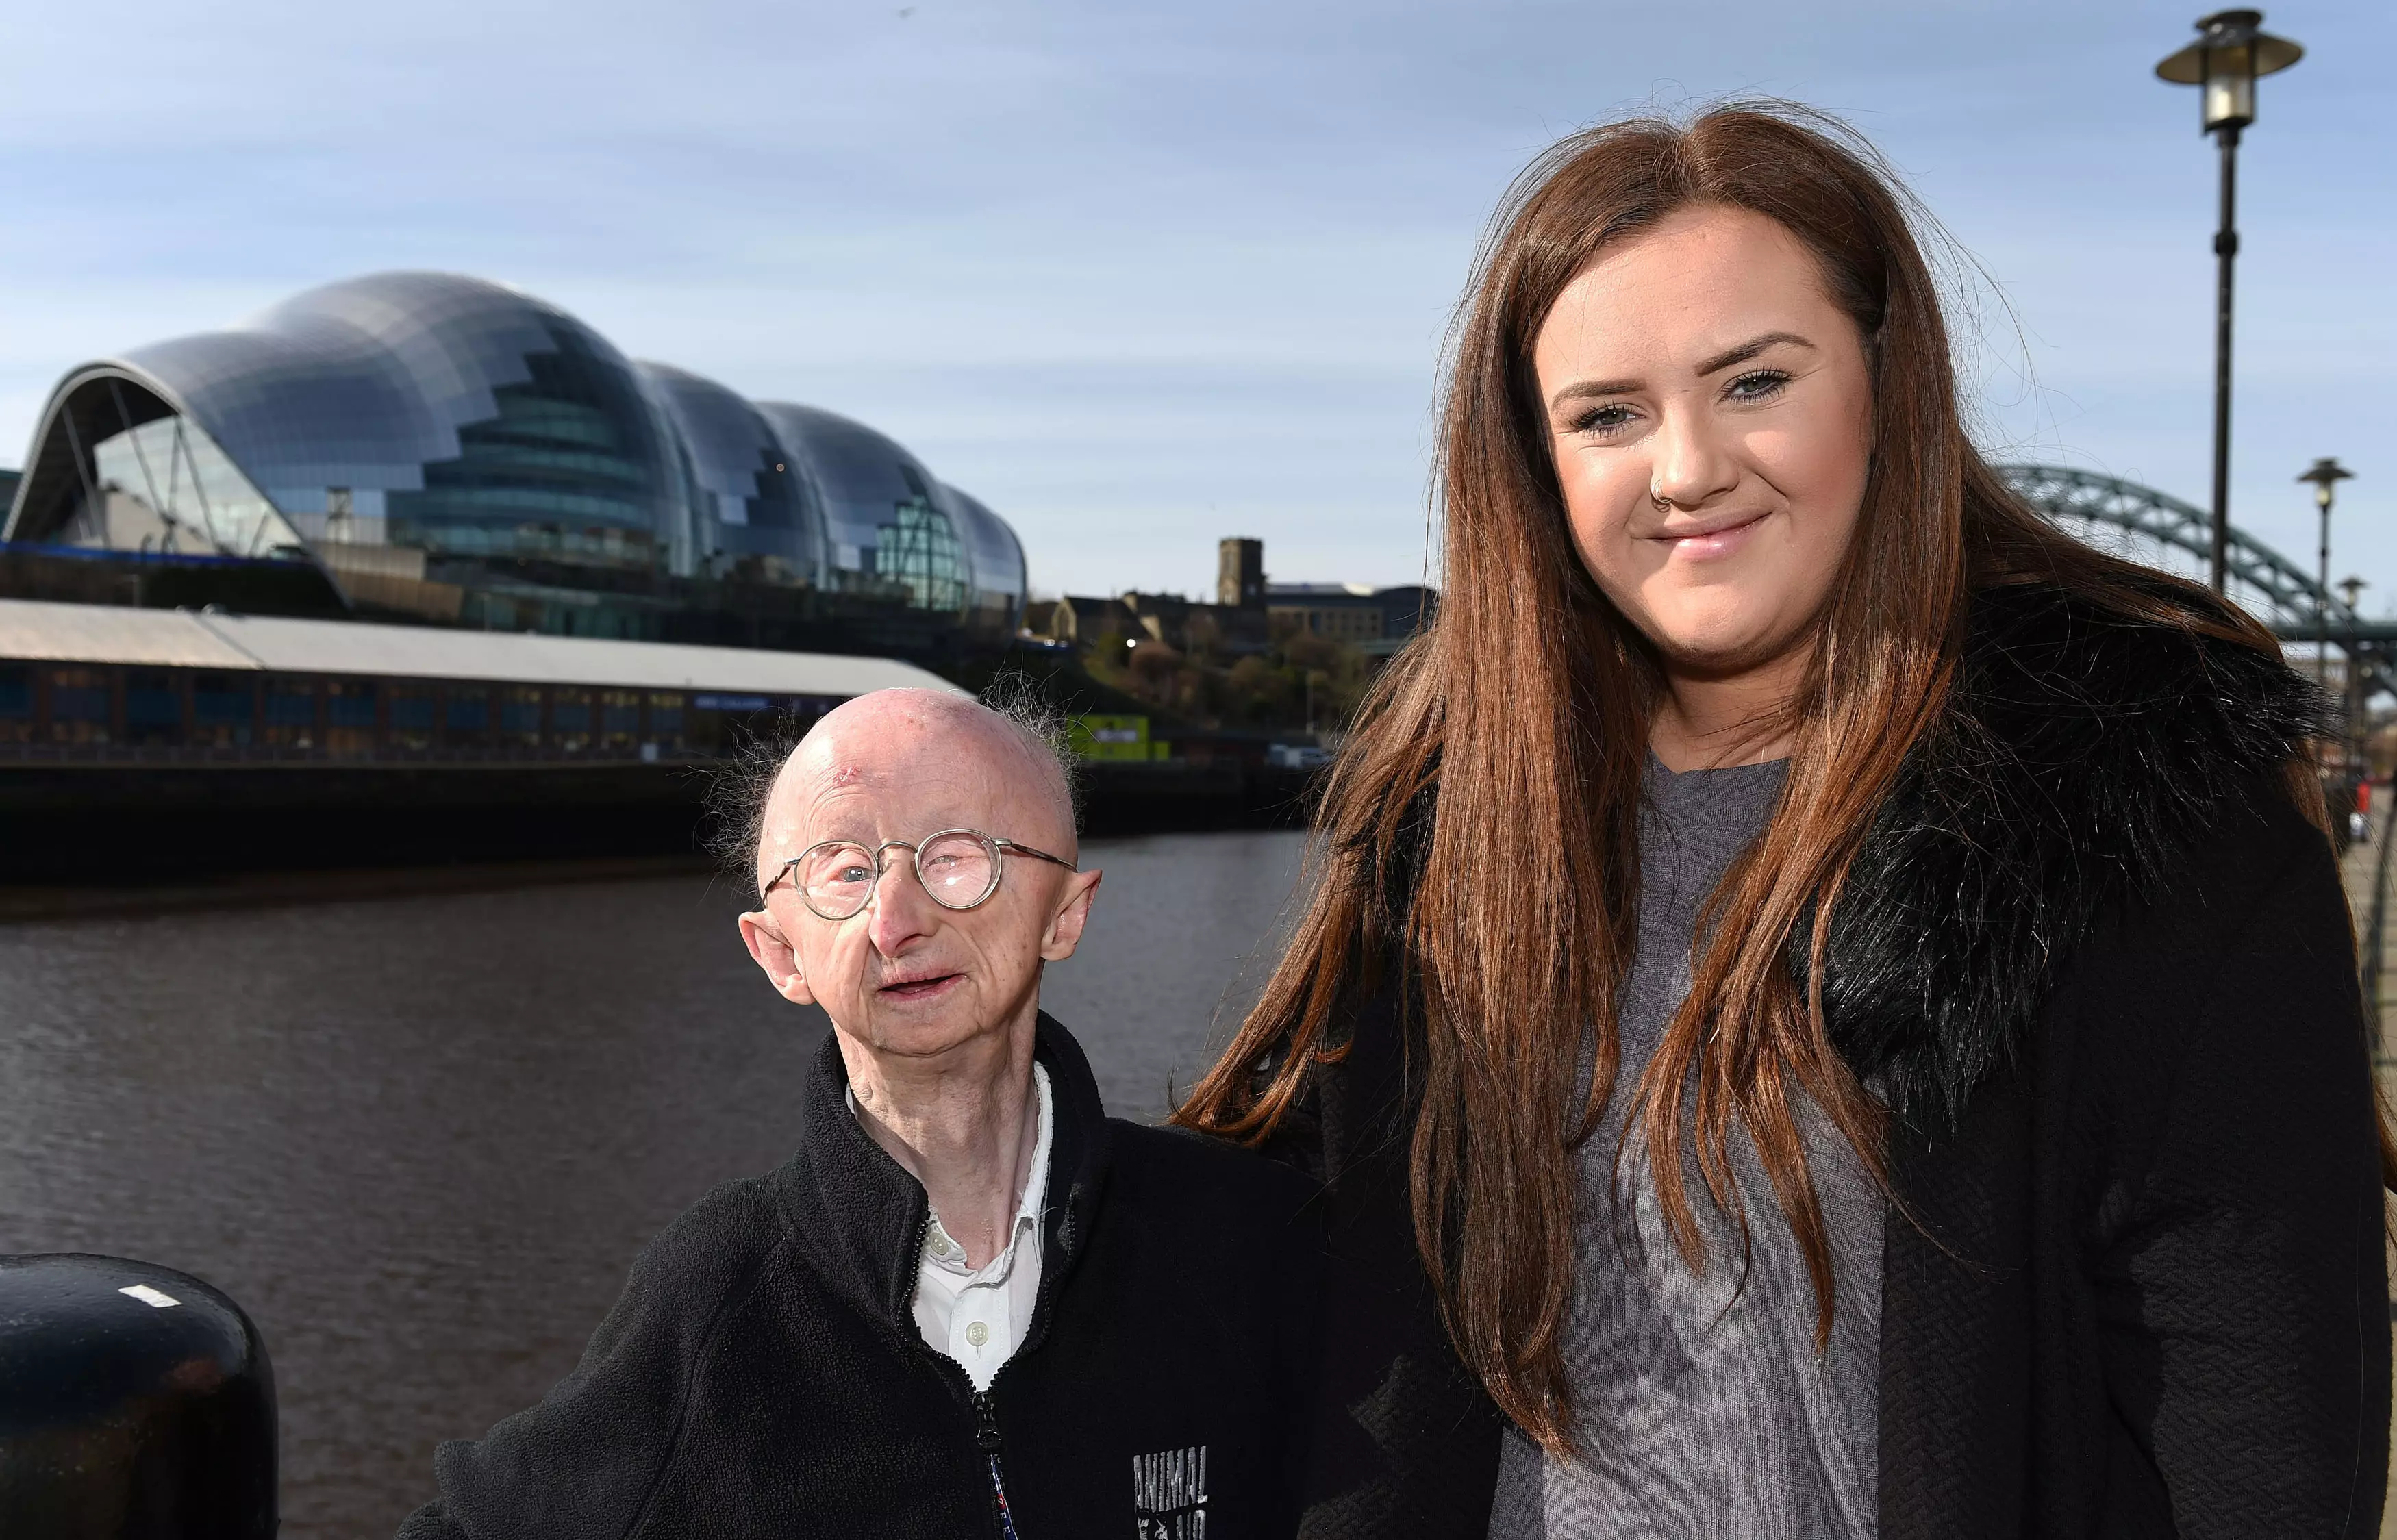 Woman Who Raised £330,000 For Alan Barnes Used PR Firm To Try And Get On CBB